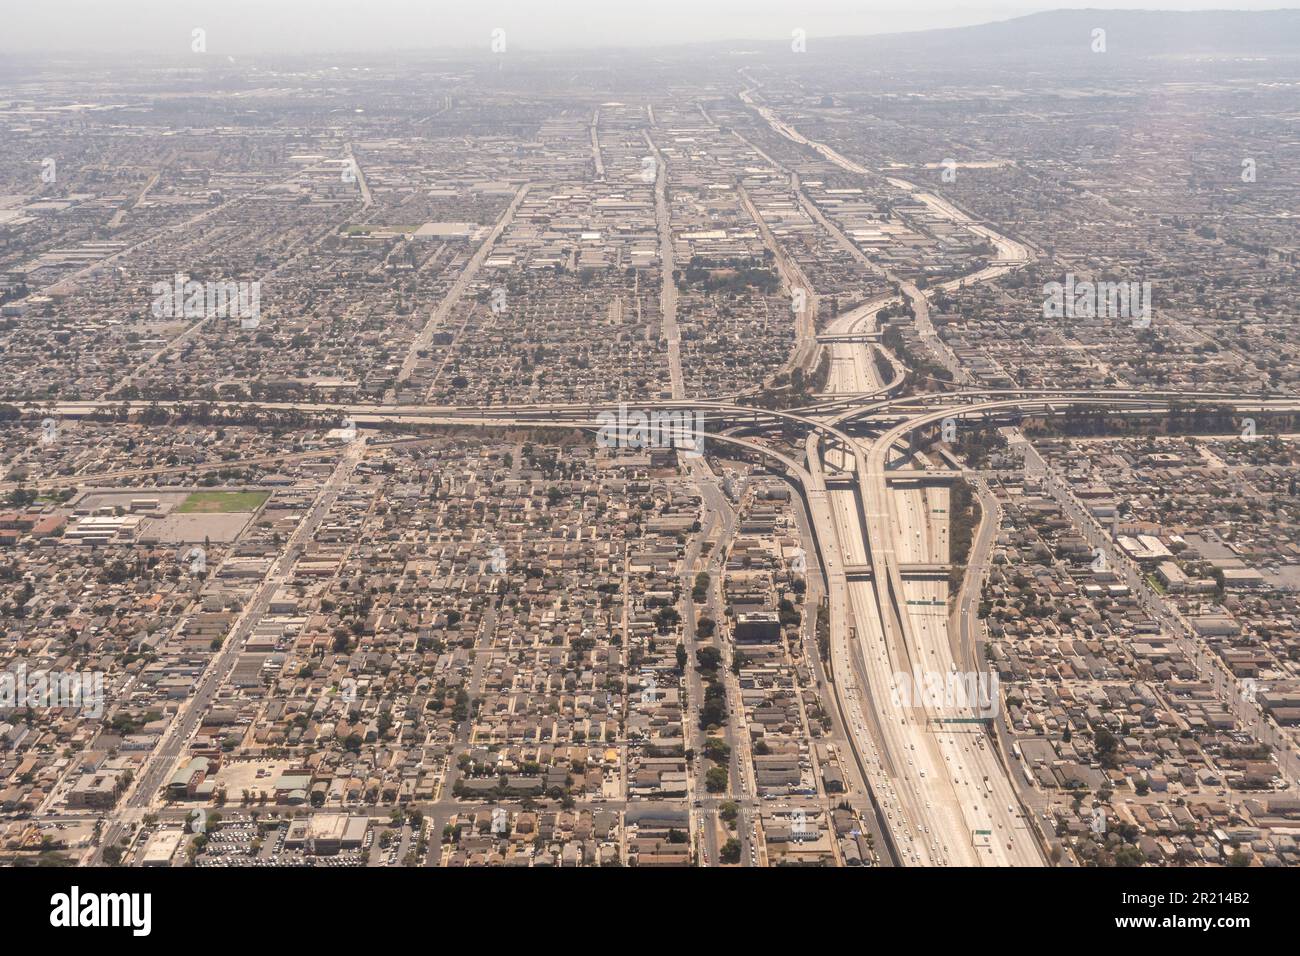 Los Angeles California - Aerial picture of The Interchange at the intersection of the I-105 and the I--110 (harbor freeway) & the Metro Green Line Stock Photo